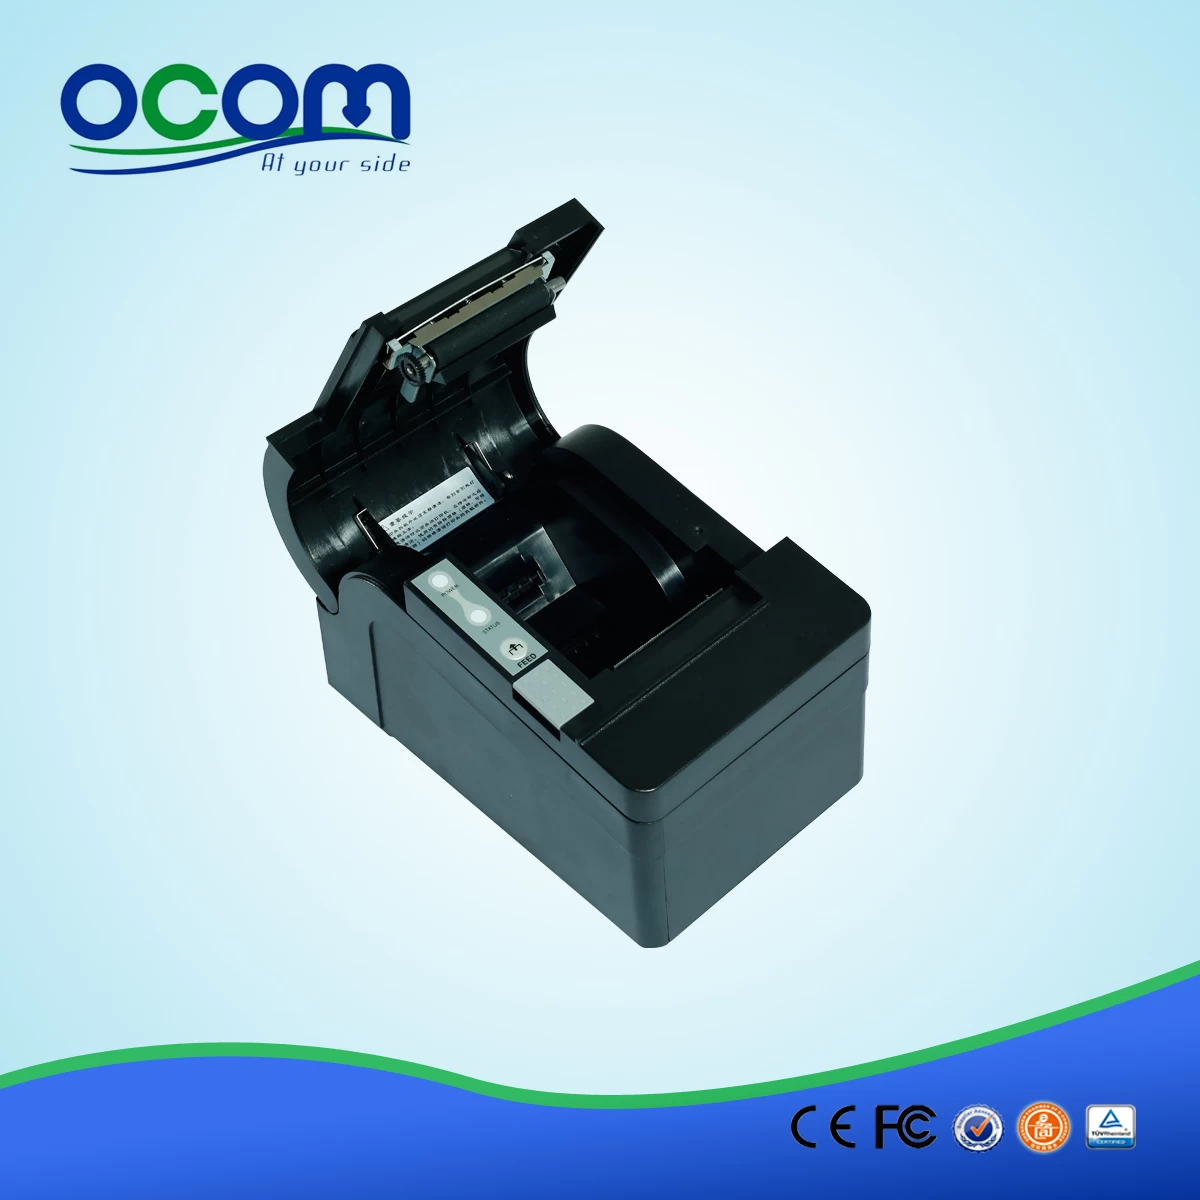 High Printing Speed Bill Thermal Printer with Auto cutter